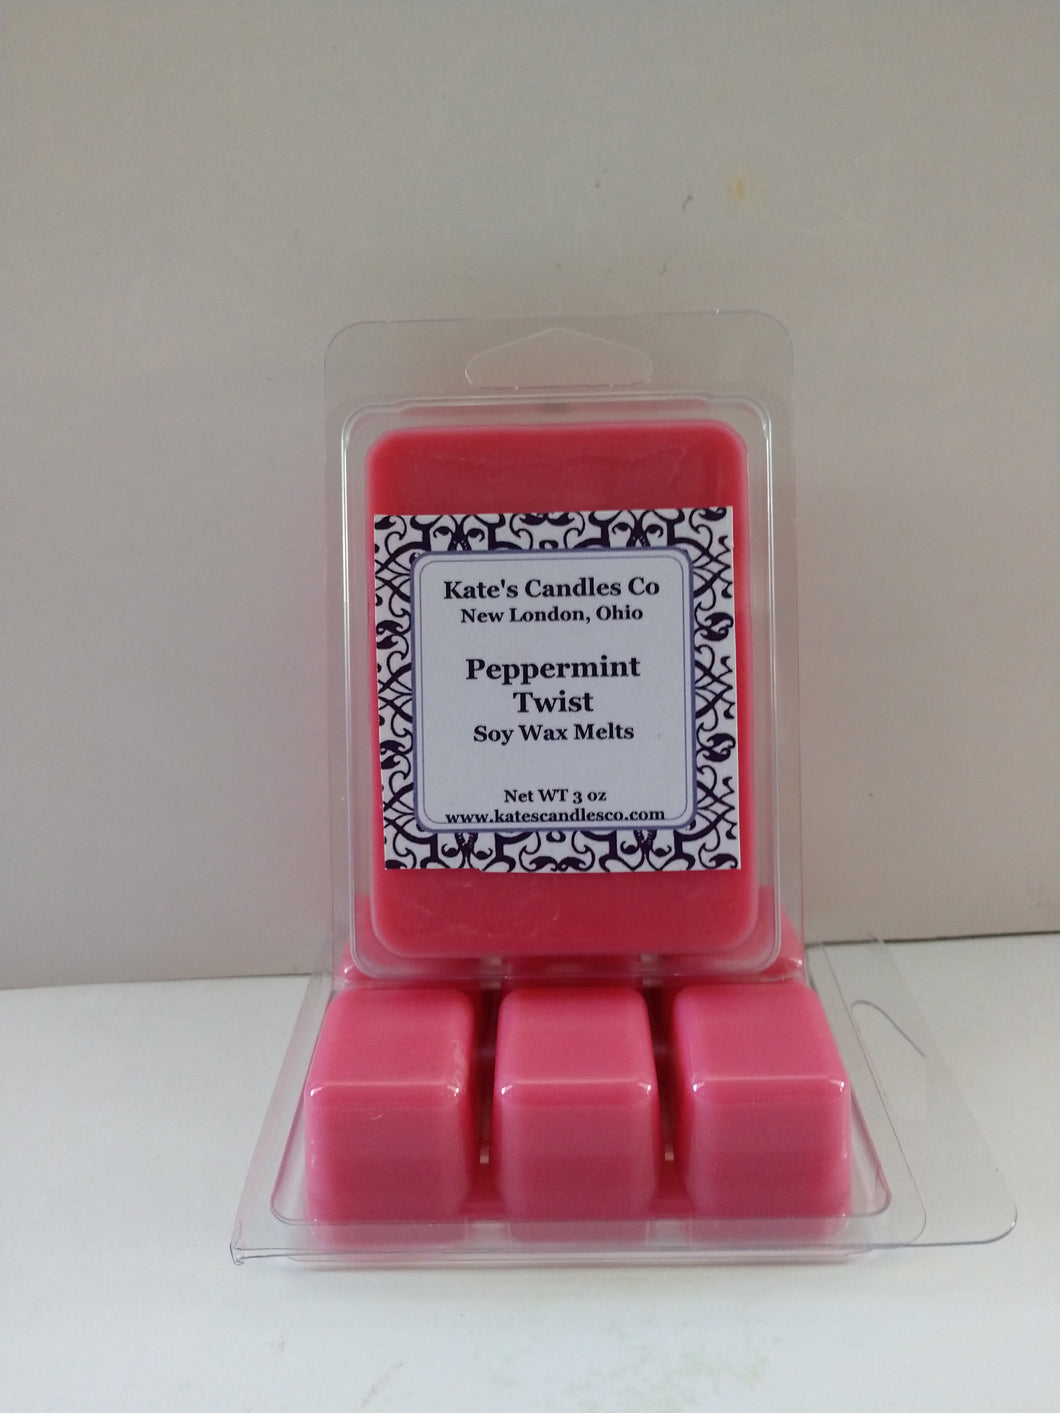 Peppermint Twist Soy Wax Melts - Kate's Candles Co. Soy Candles